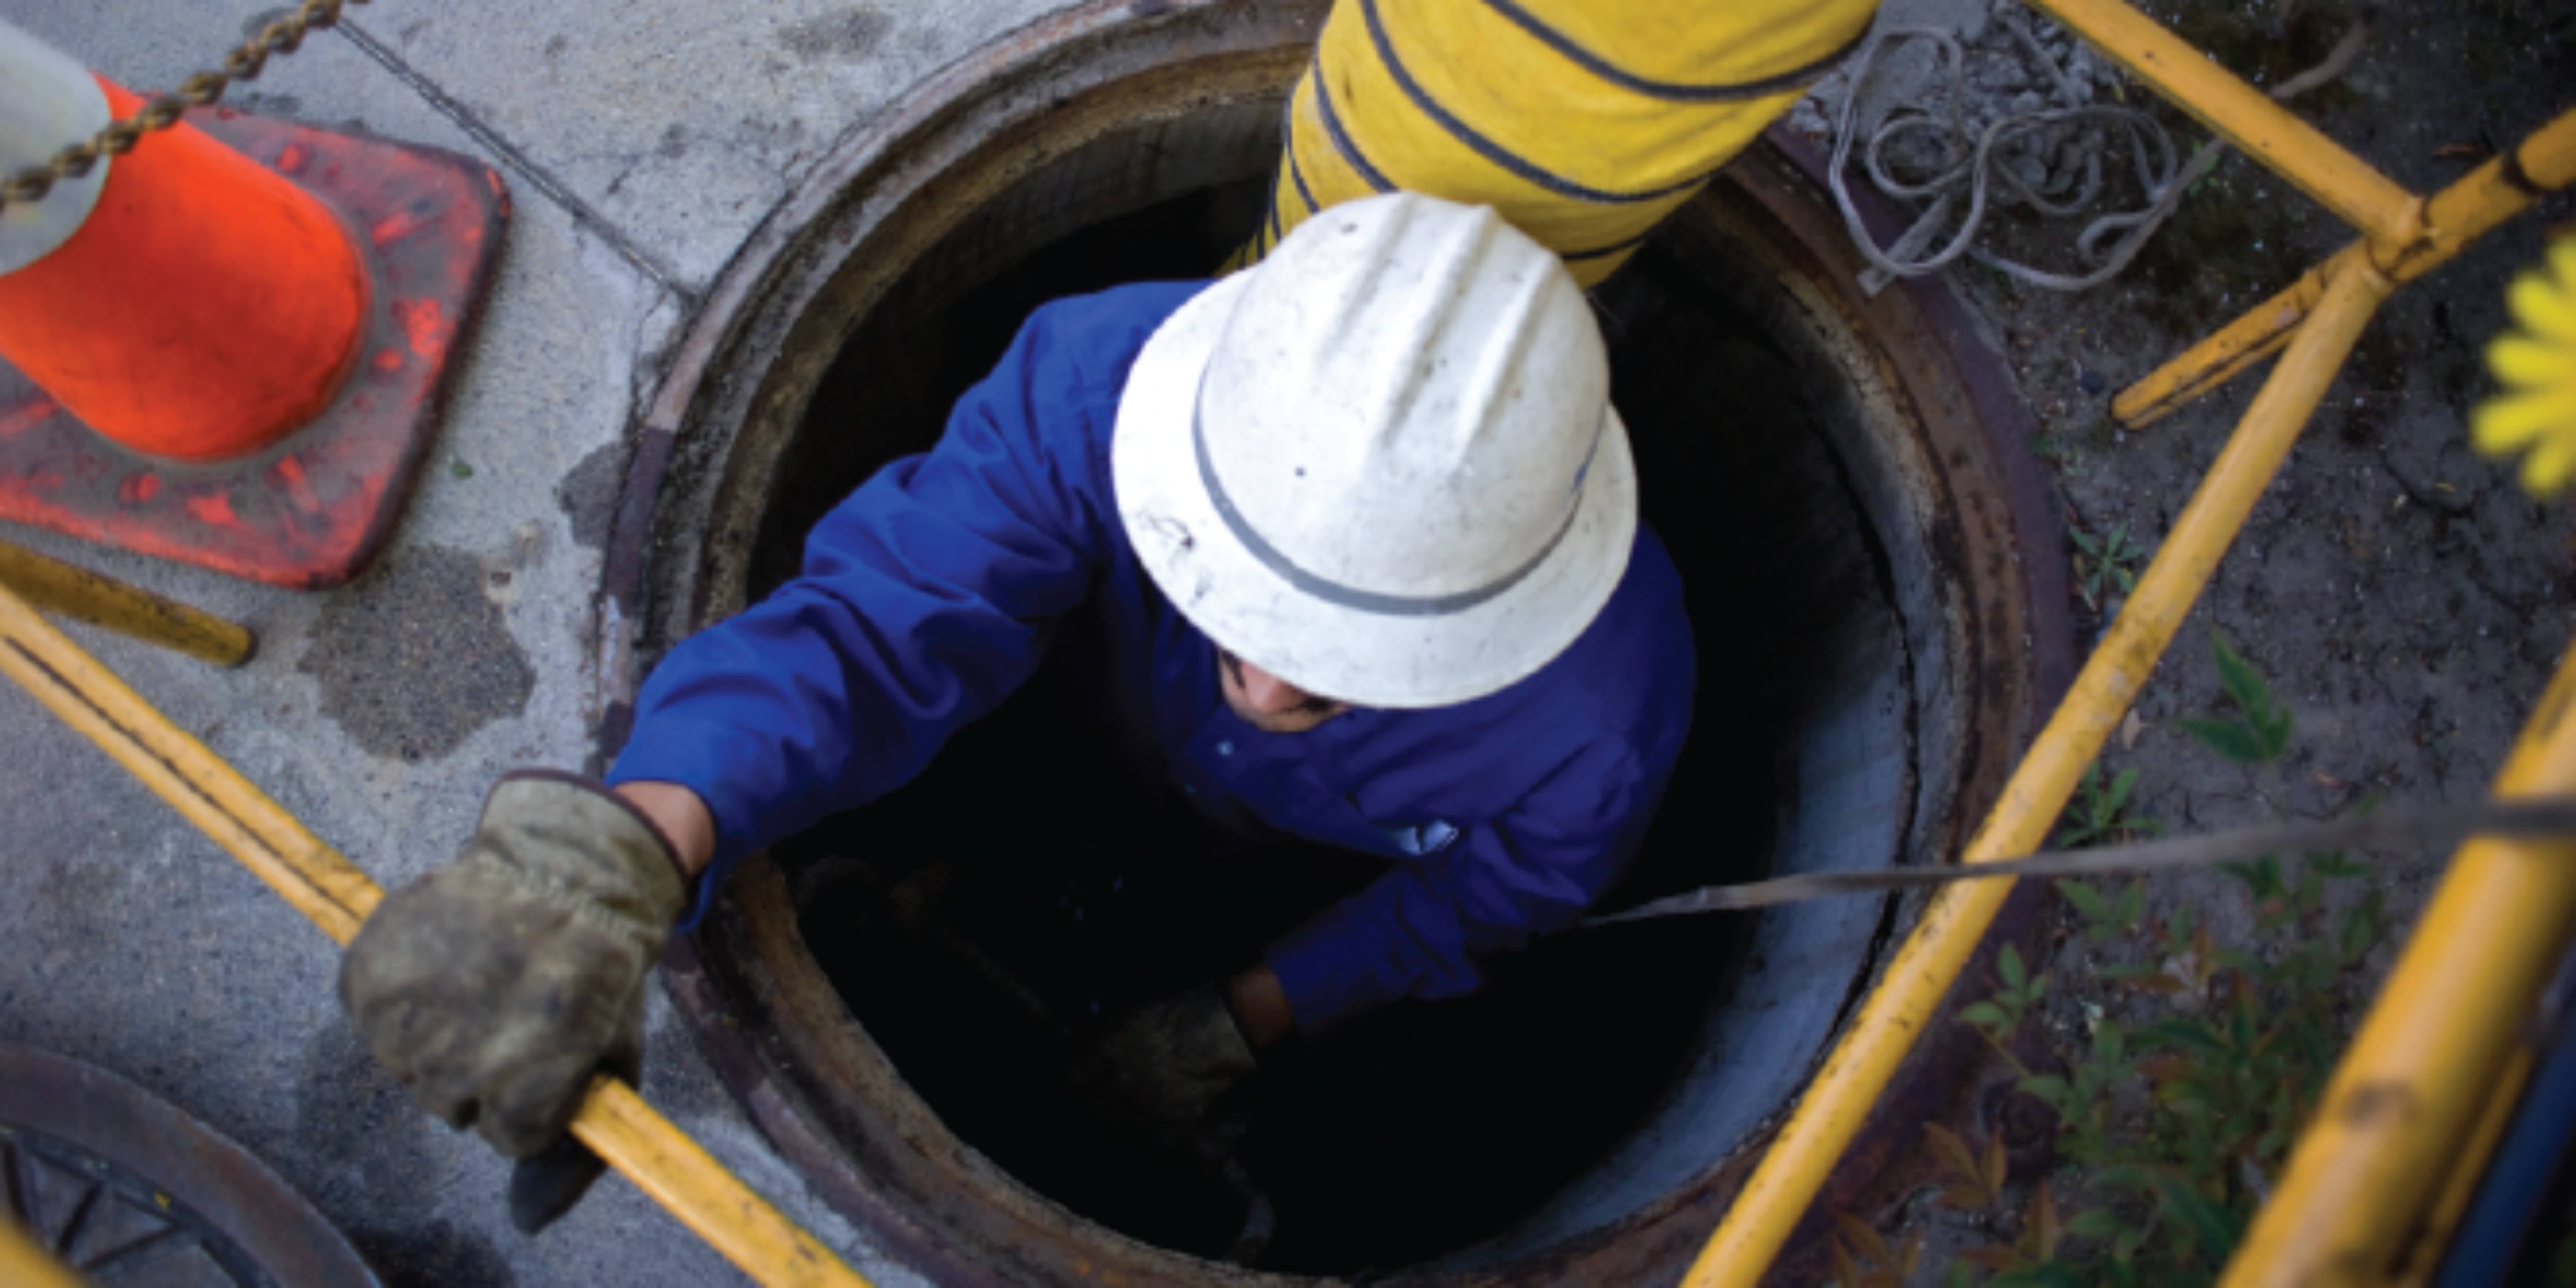 man wearing safety clothing, hard hat and gloves working in a confined space.